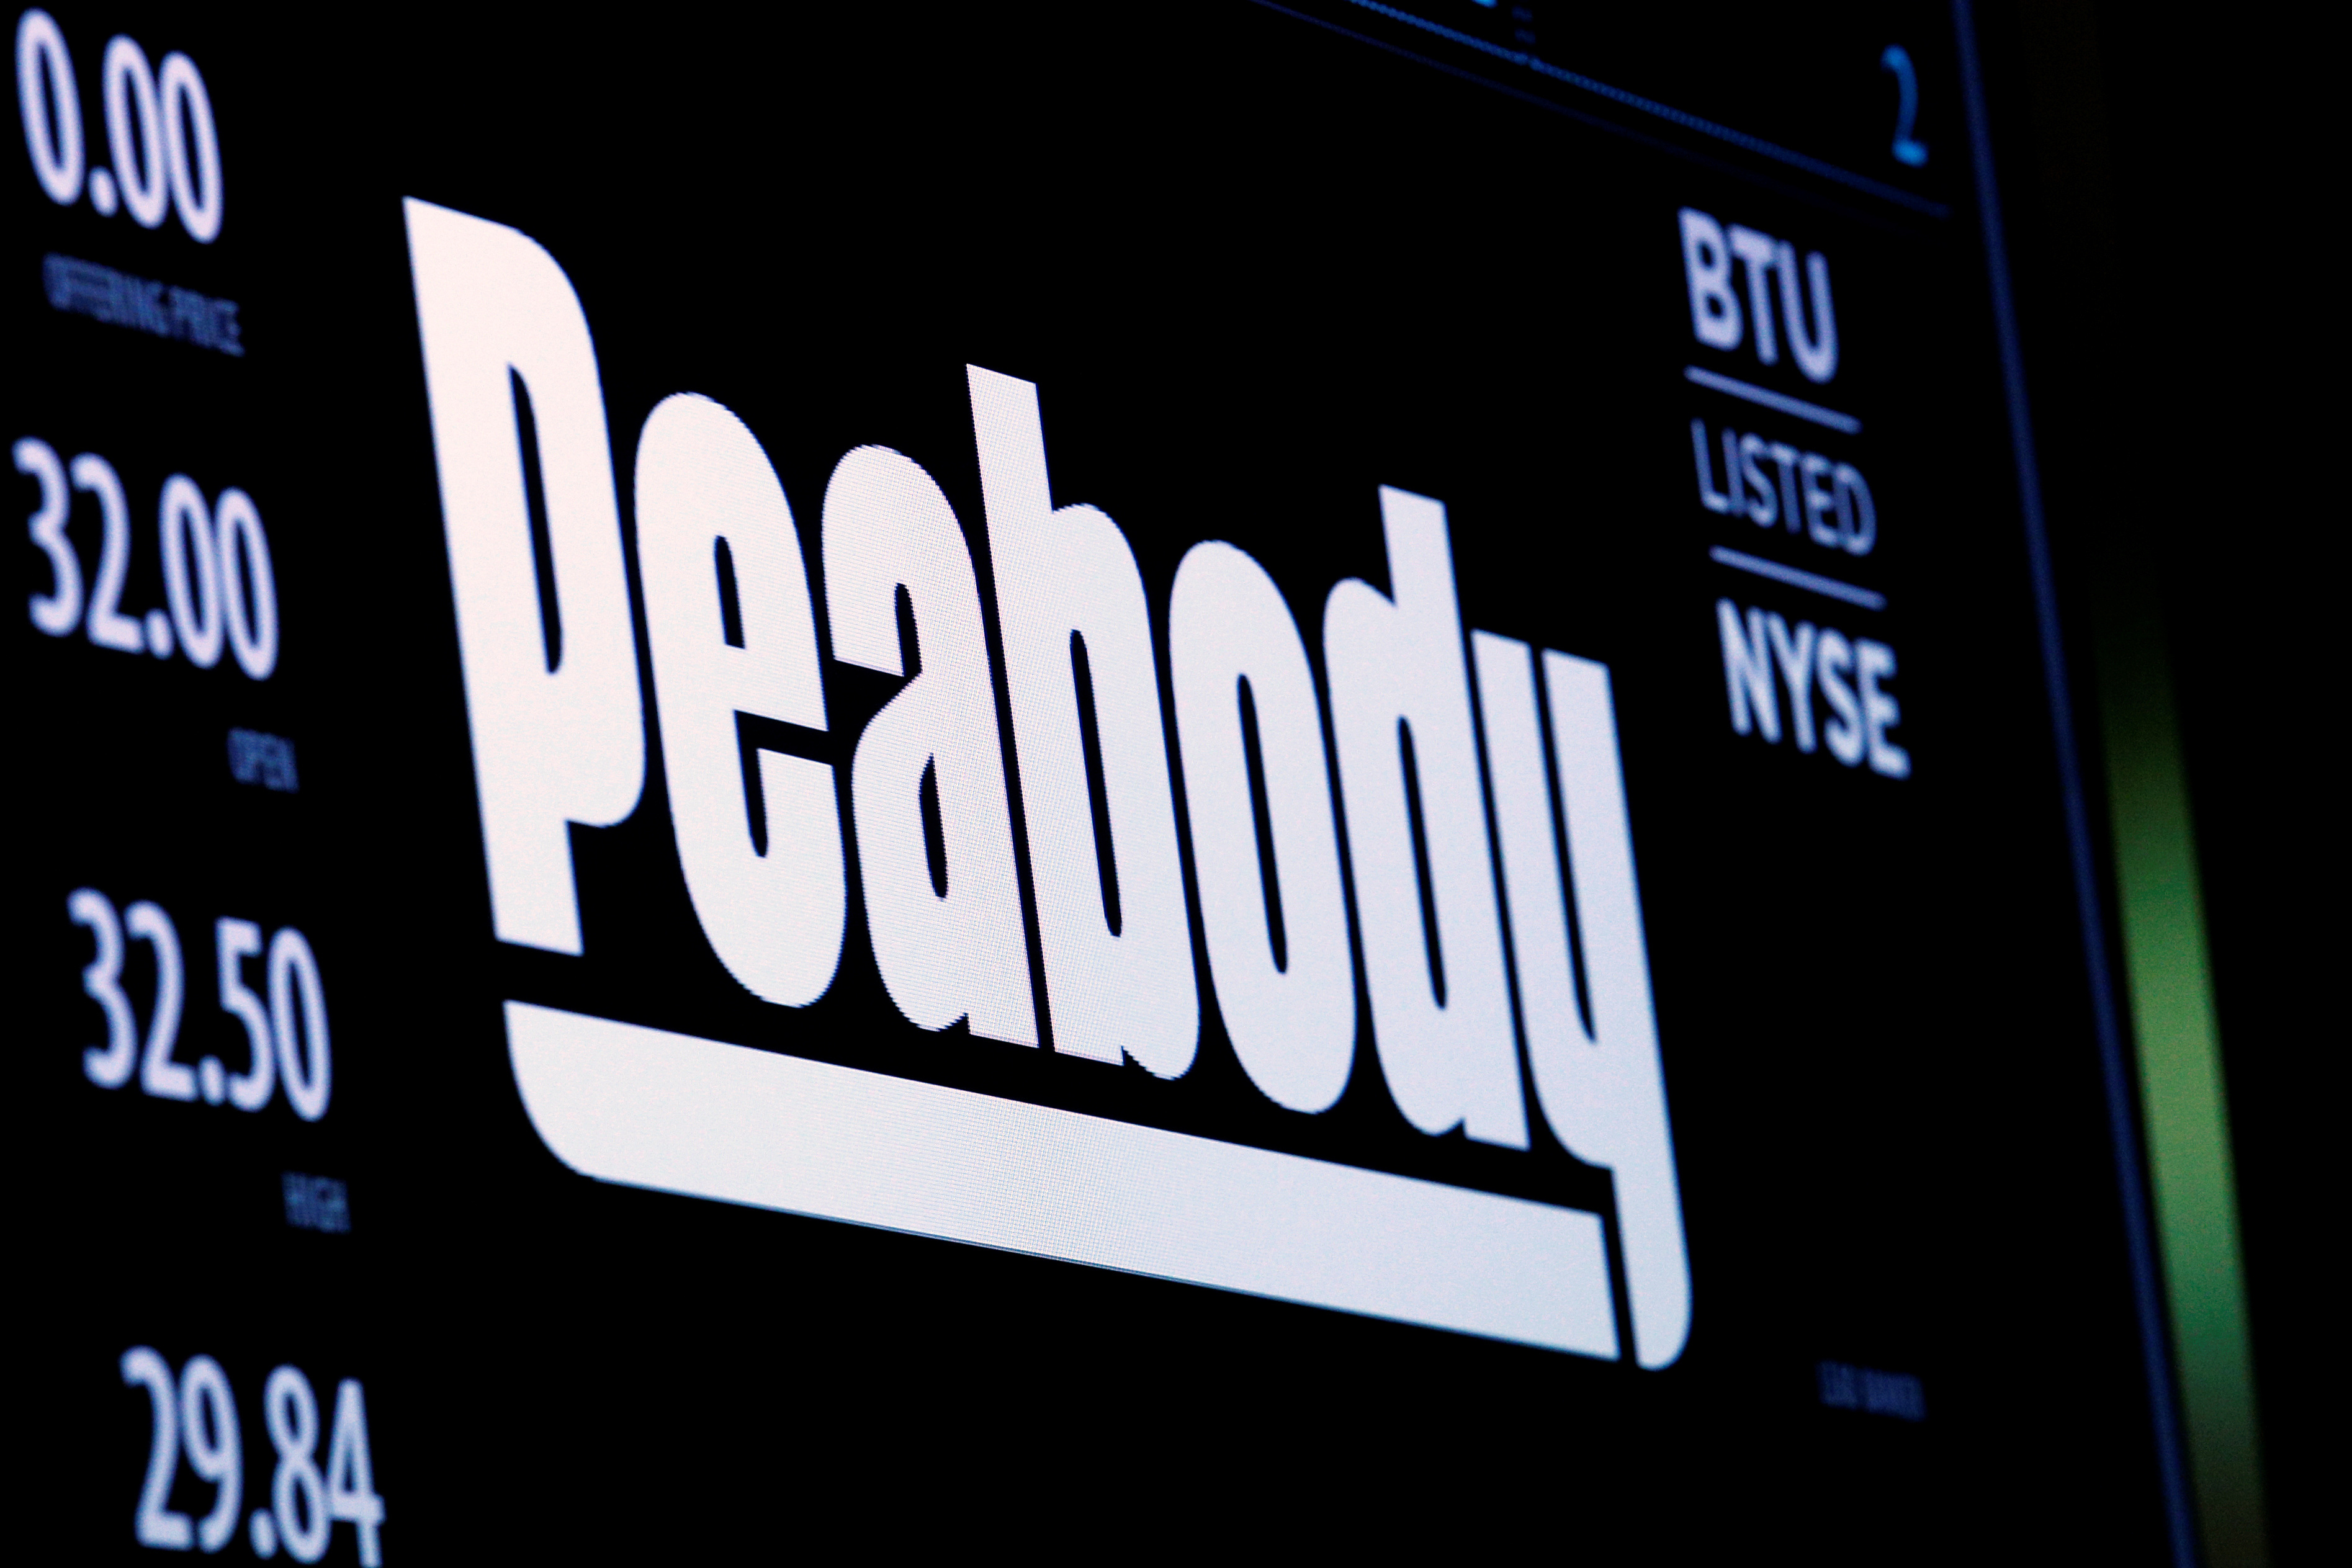 The logo and trading information for U.S. coal miner Peabody Energy Corp. are displayed on a screen on the floor of the NYSE, New York